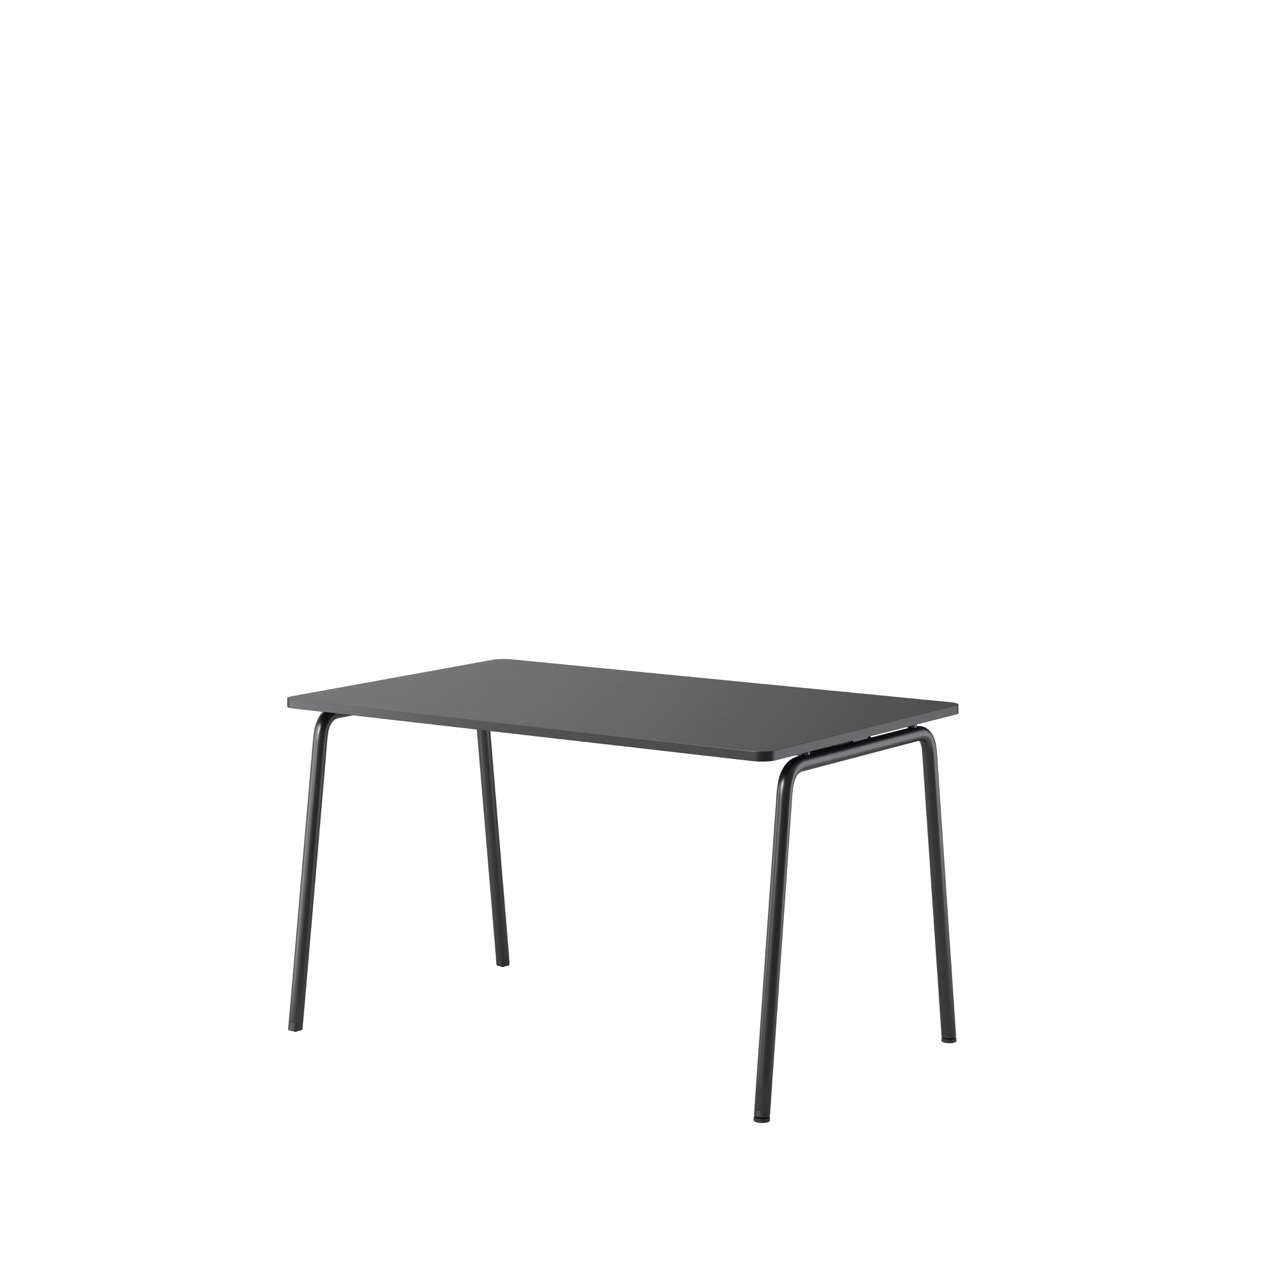 OCEE&FOUR - Tables - FourReal 74 - 120 x 80 - Angled - Packshot Image 2 Large